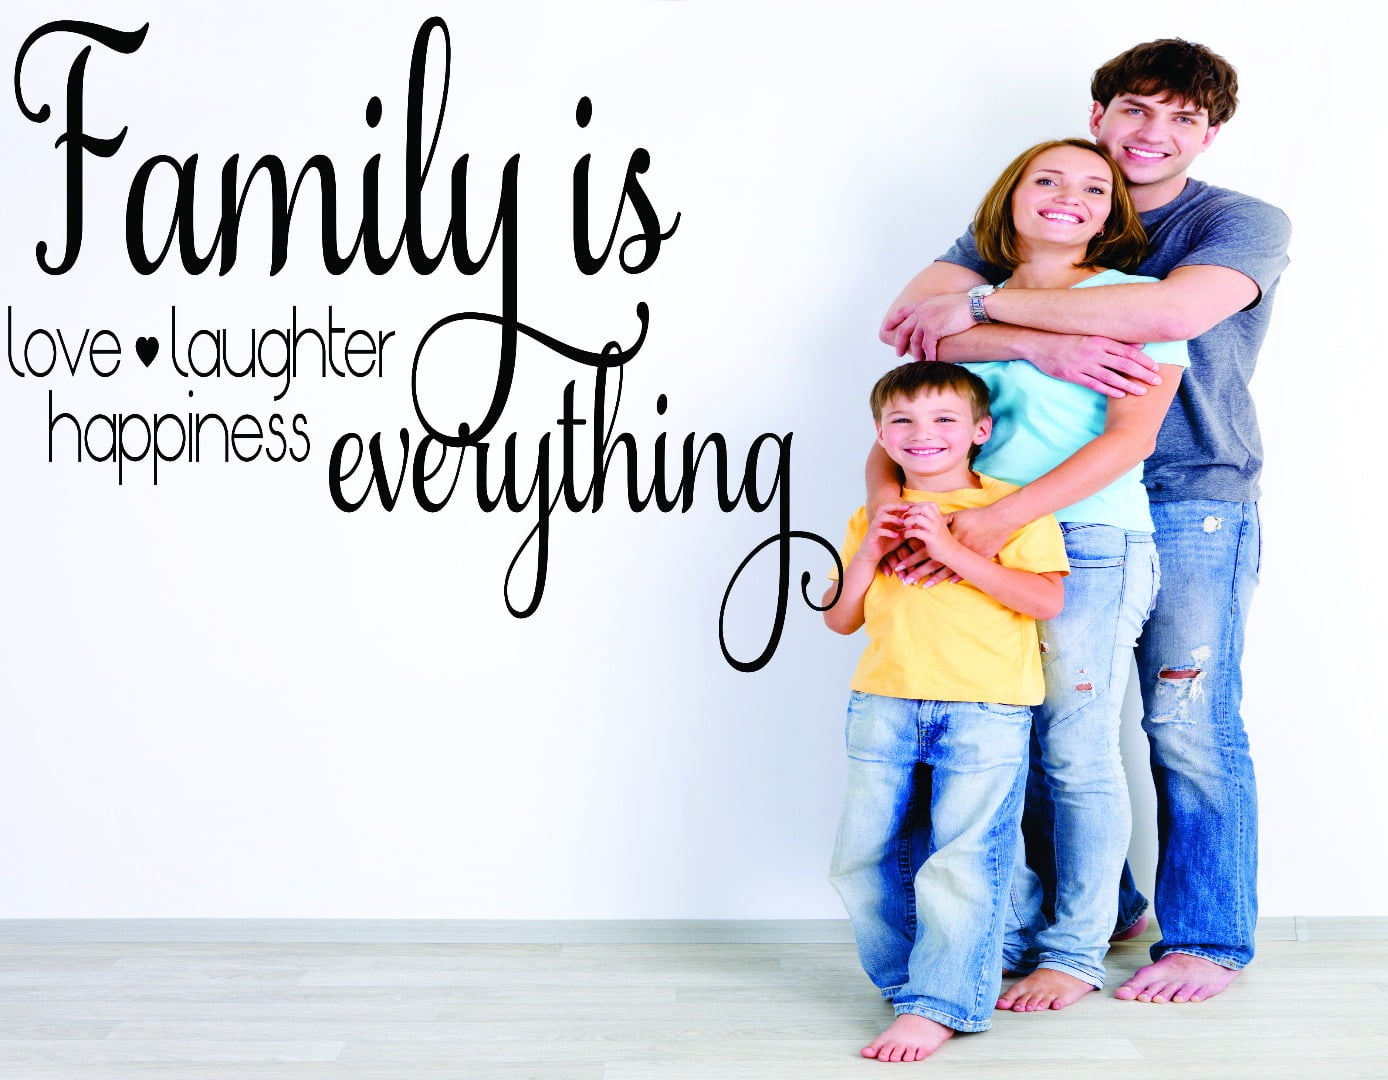 Family is everything. Happy laughter of children and Joy in every Family quotes.